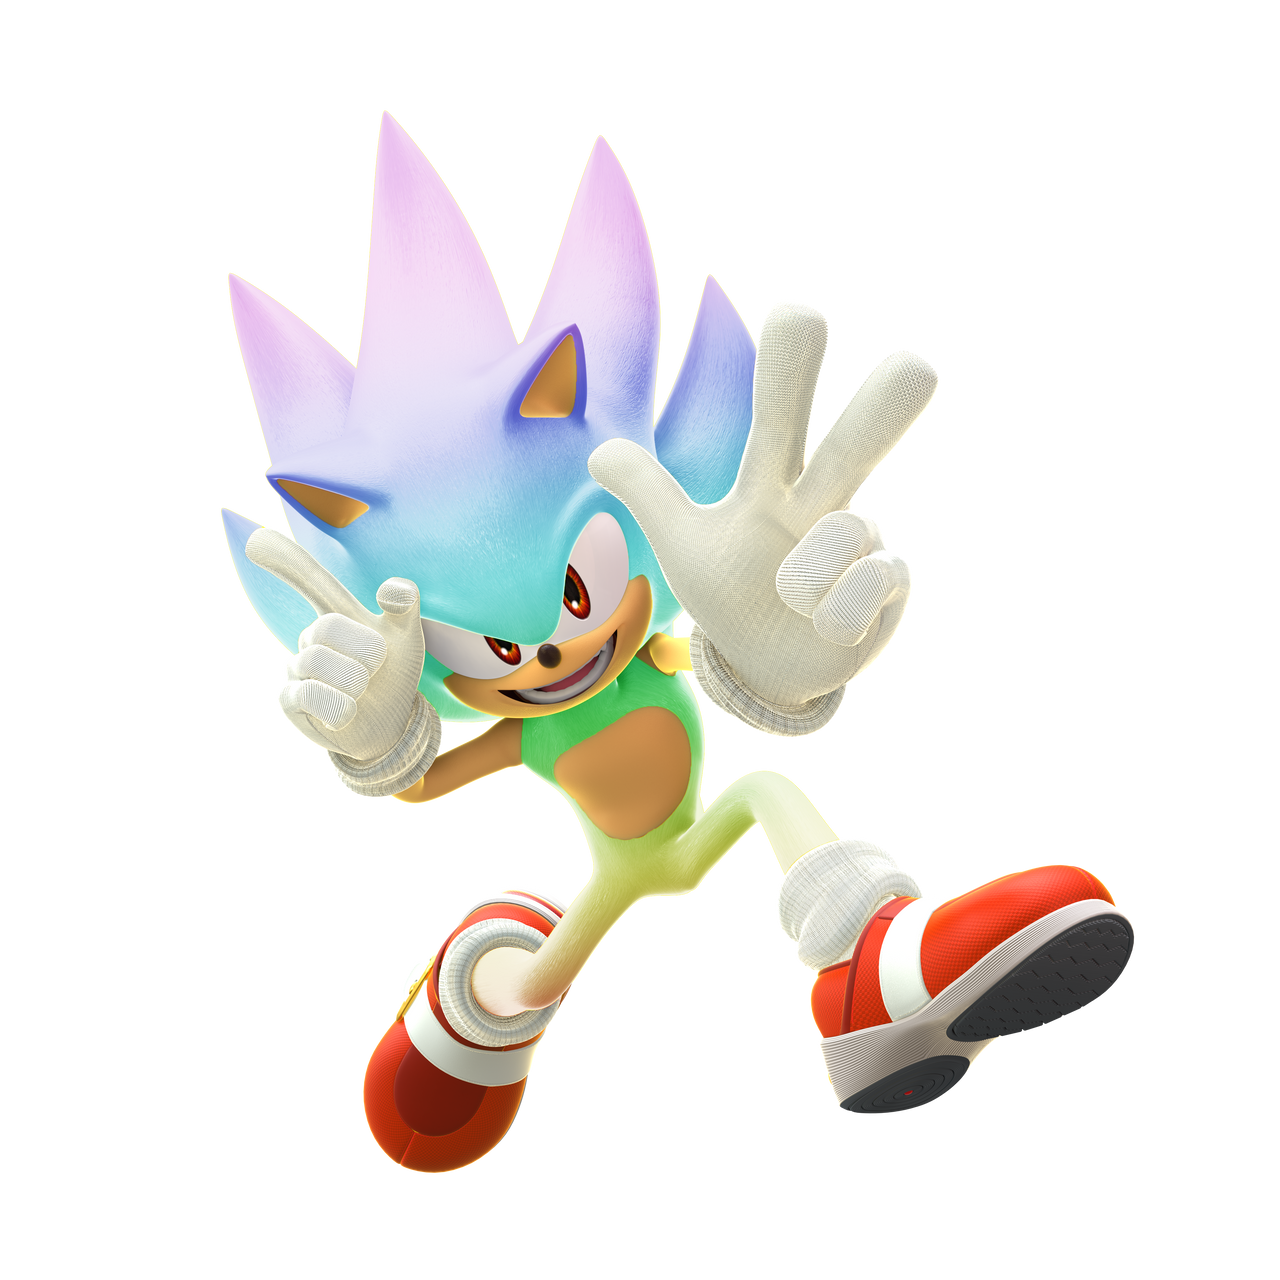 Hyper Sonic is the Coolest Pose! by SonicOnBox on DeviantArt